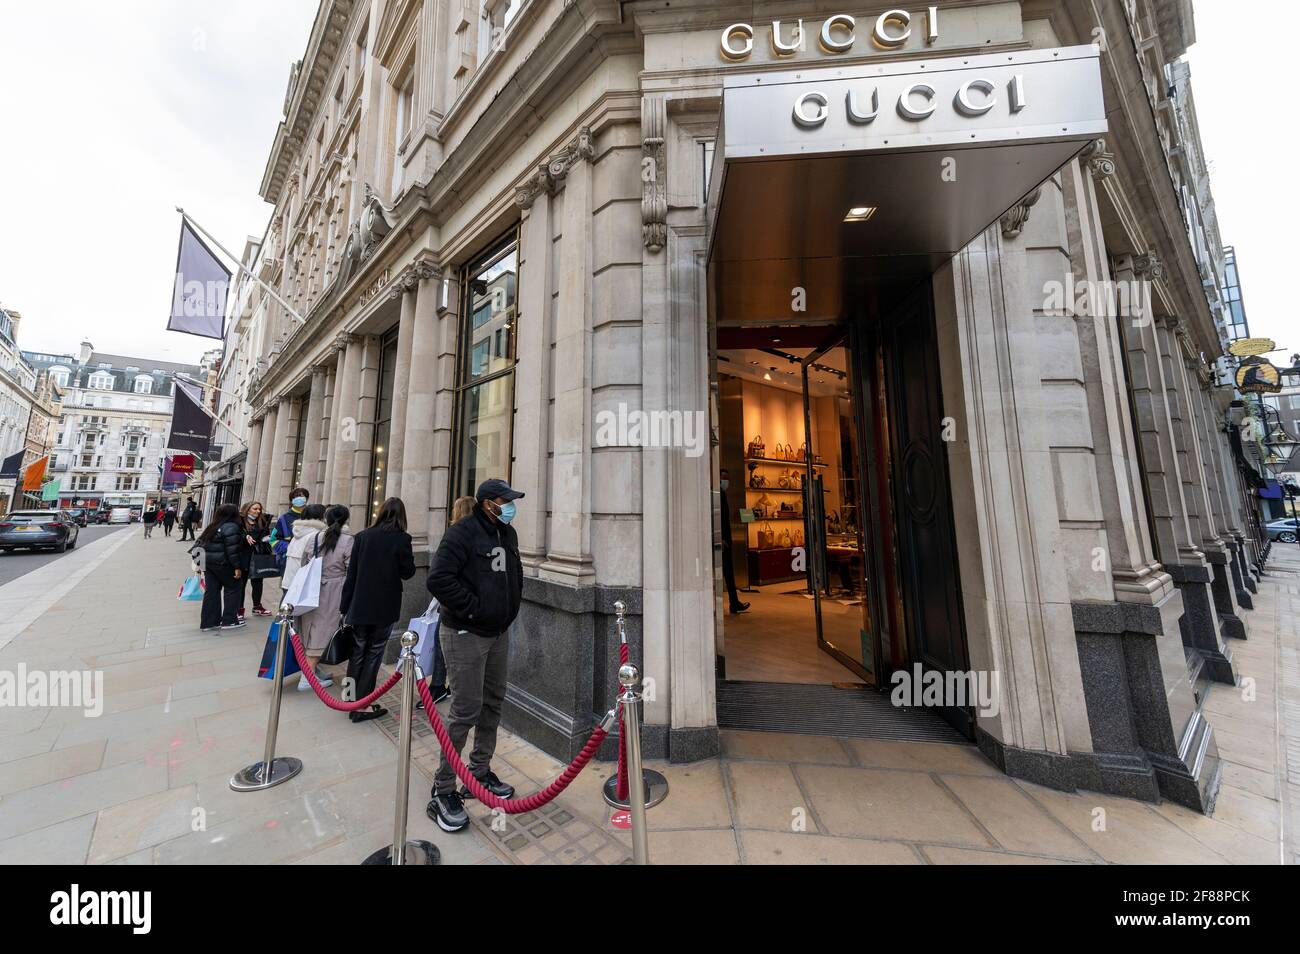 London, UK. 12 April 2021. People queue to enter the Gucci store in Old  Bond Street in Mayfair following the UK government's coronavirus roadmap  out of lockdown which allowed non-essential shops to